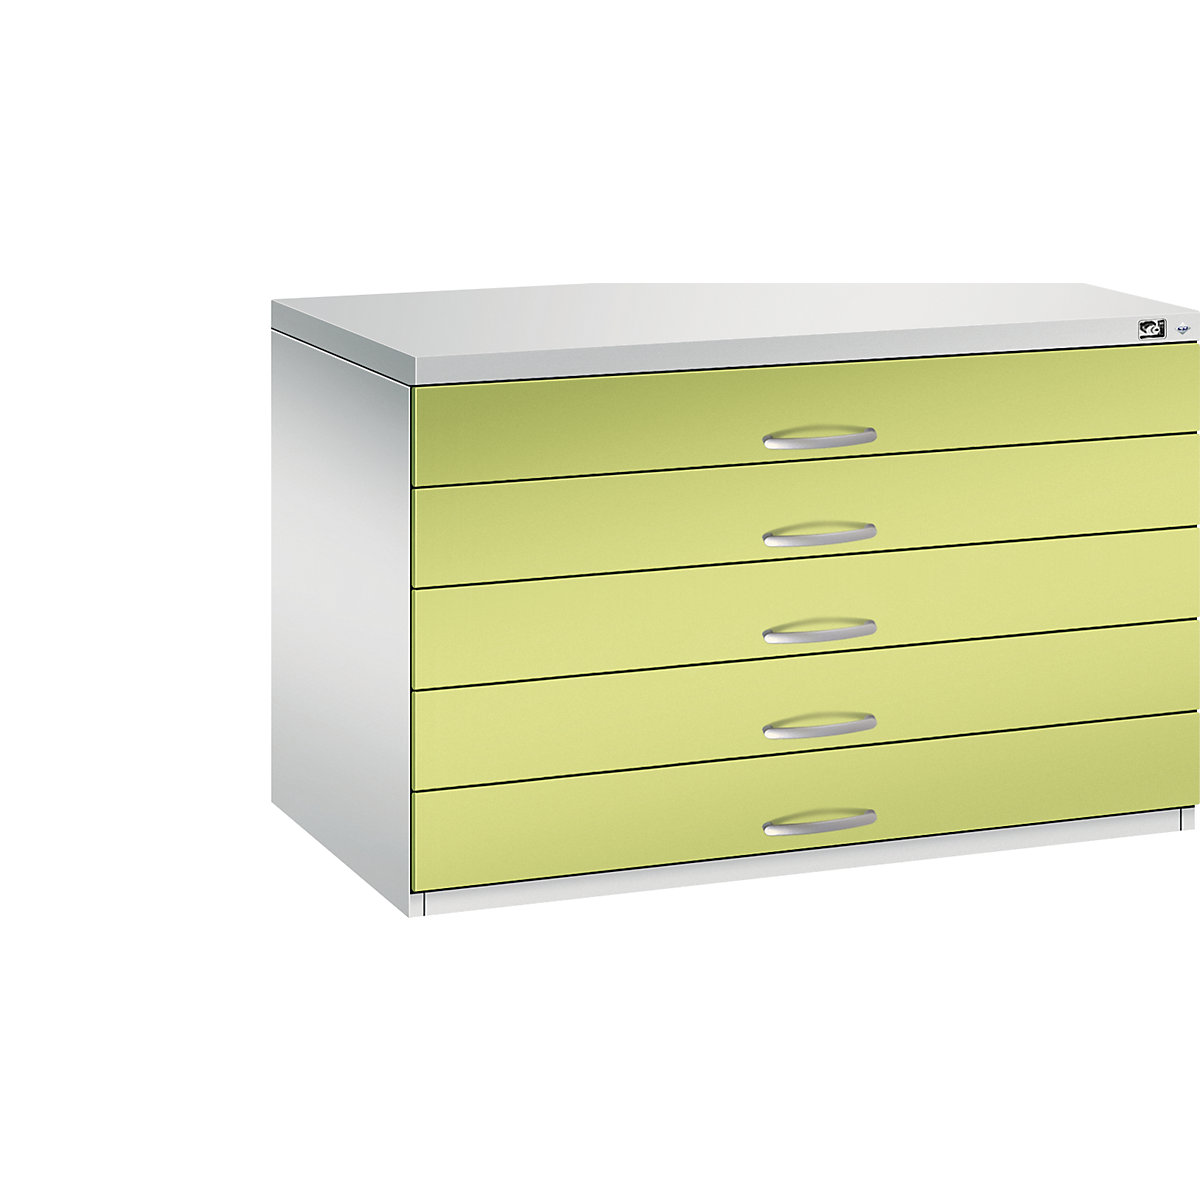 Drawing cabinet – C+P, A1, 5 drawers, height 760 mm, light grey / viridian green-14